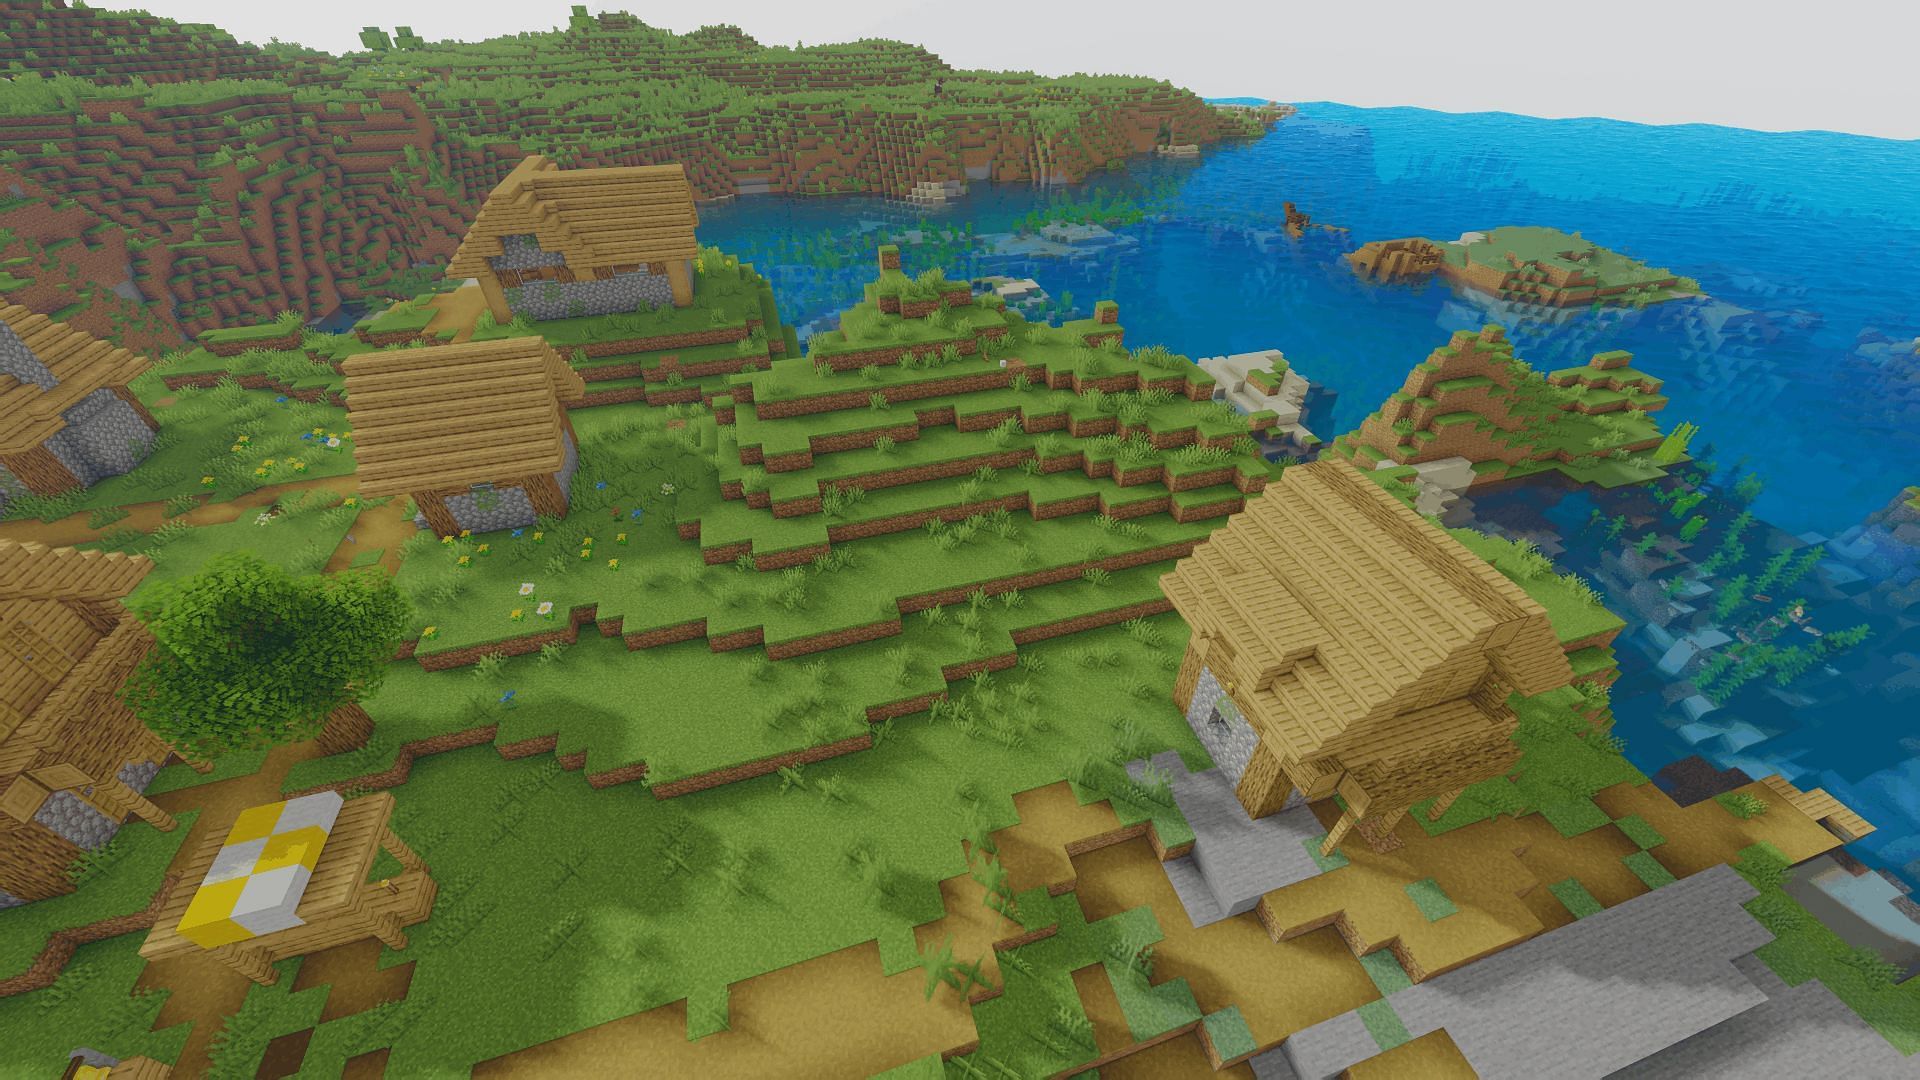 The plains village with the Oceano shader applied (Image via Minecraft)